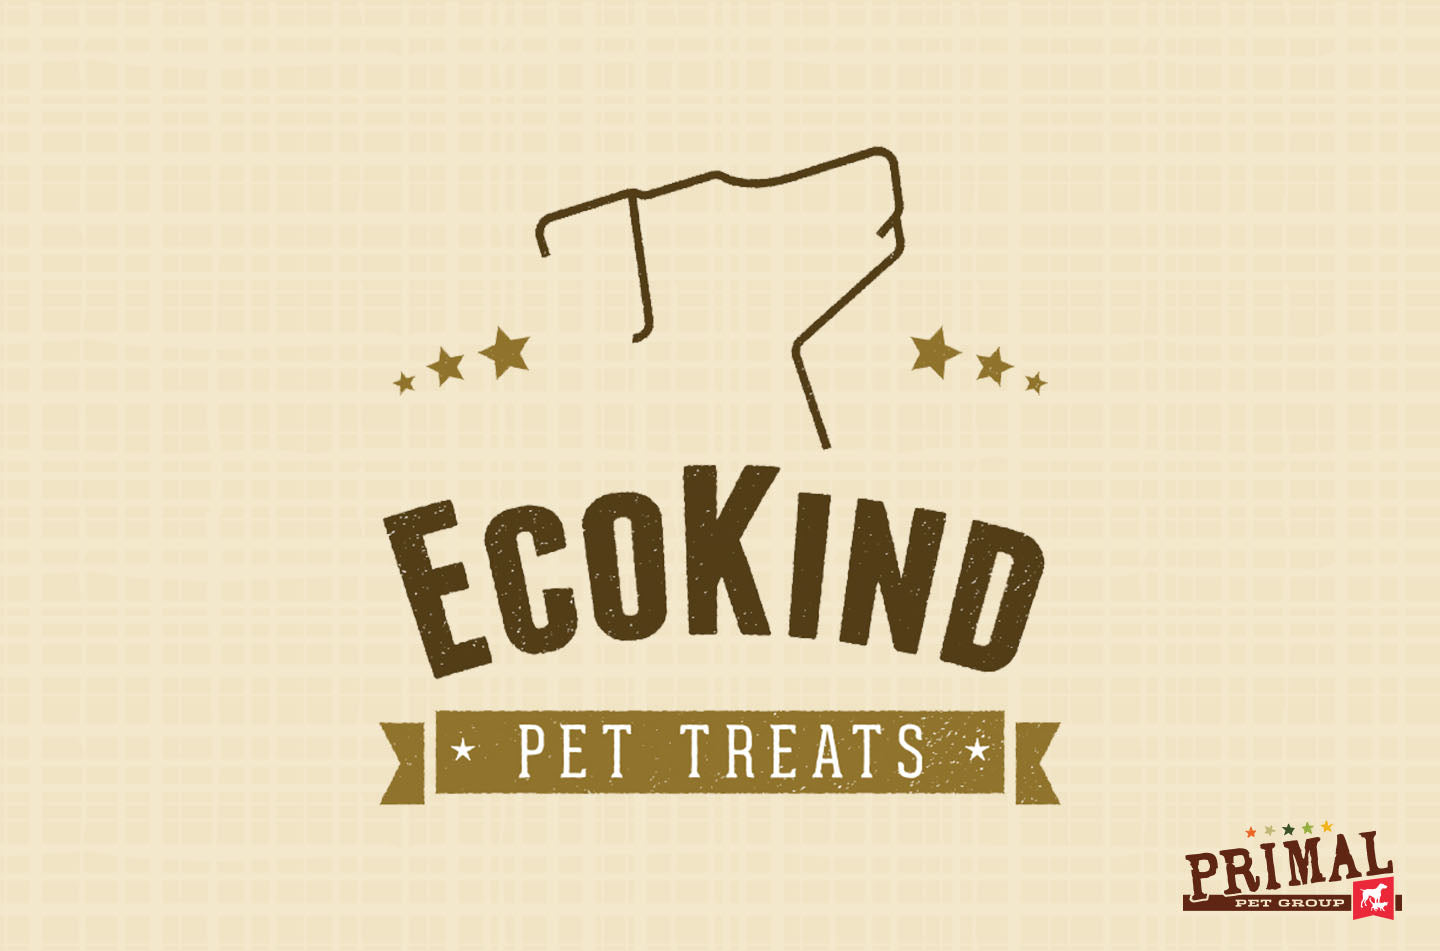 Say Cheese! Primal Pet Group acquires EcoKind LLC, a leading provider of long-lasting cheese chews